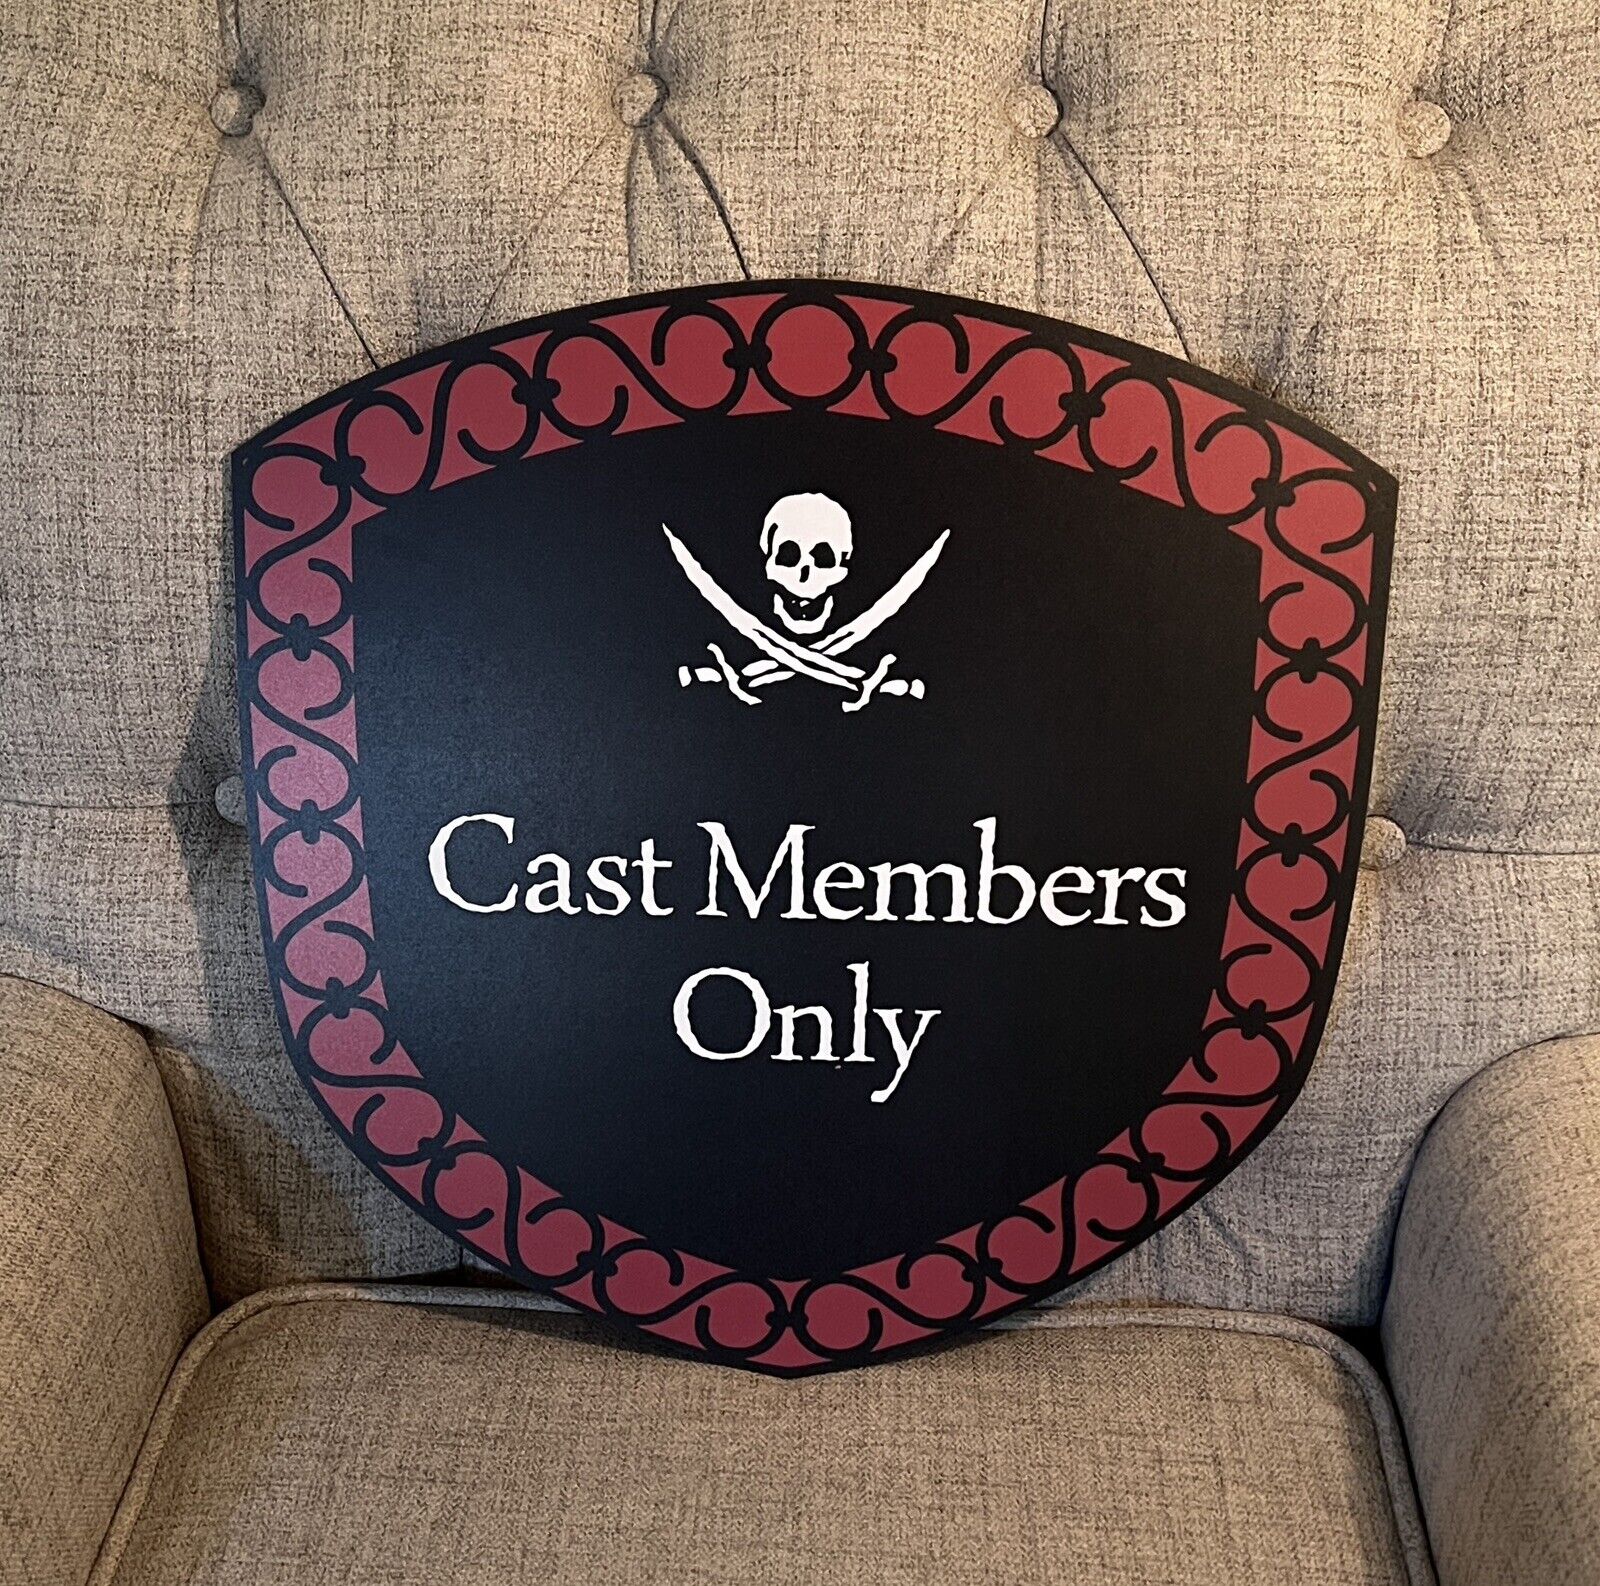 Pirates Of The Caribbean “Cast Members Only” Sign Prop Replica 18x18” POTC WDW